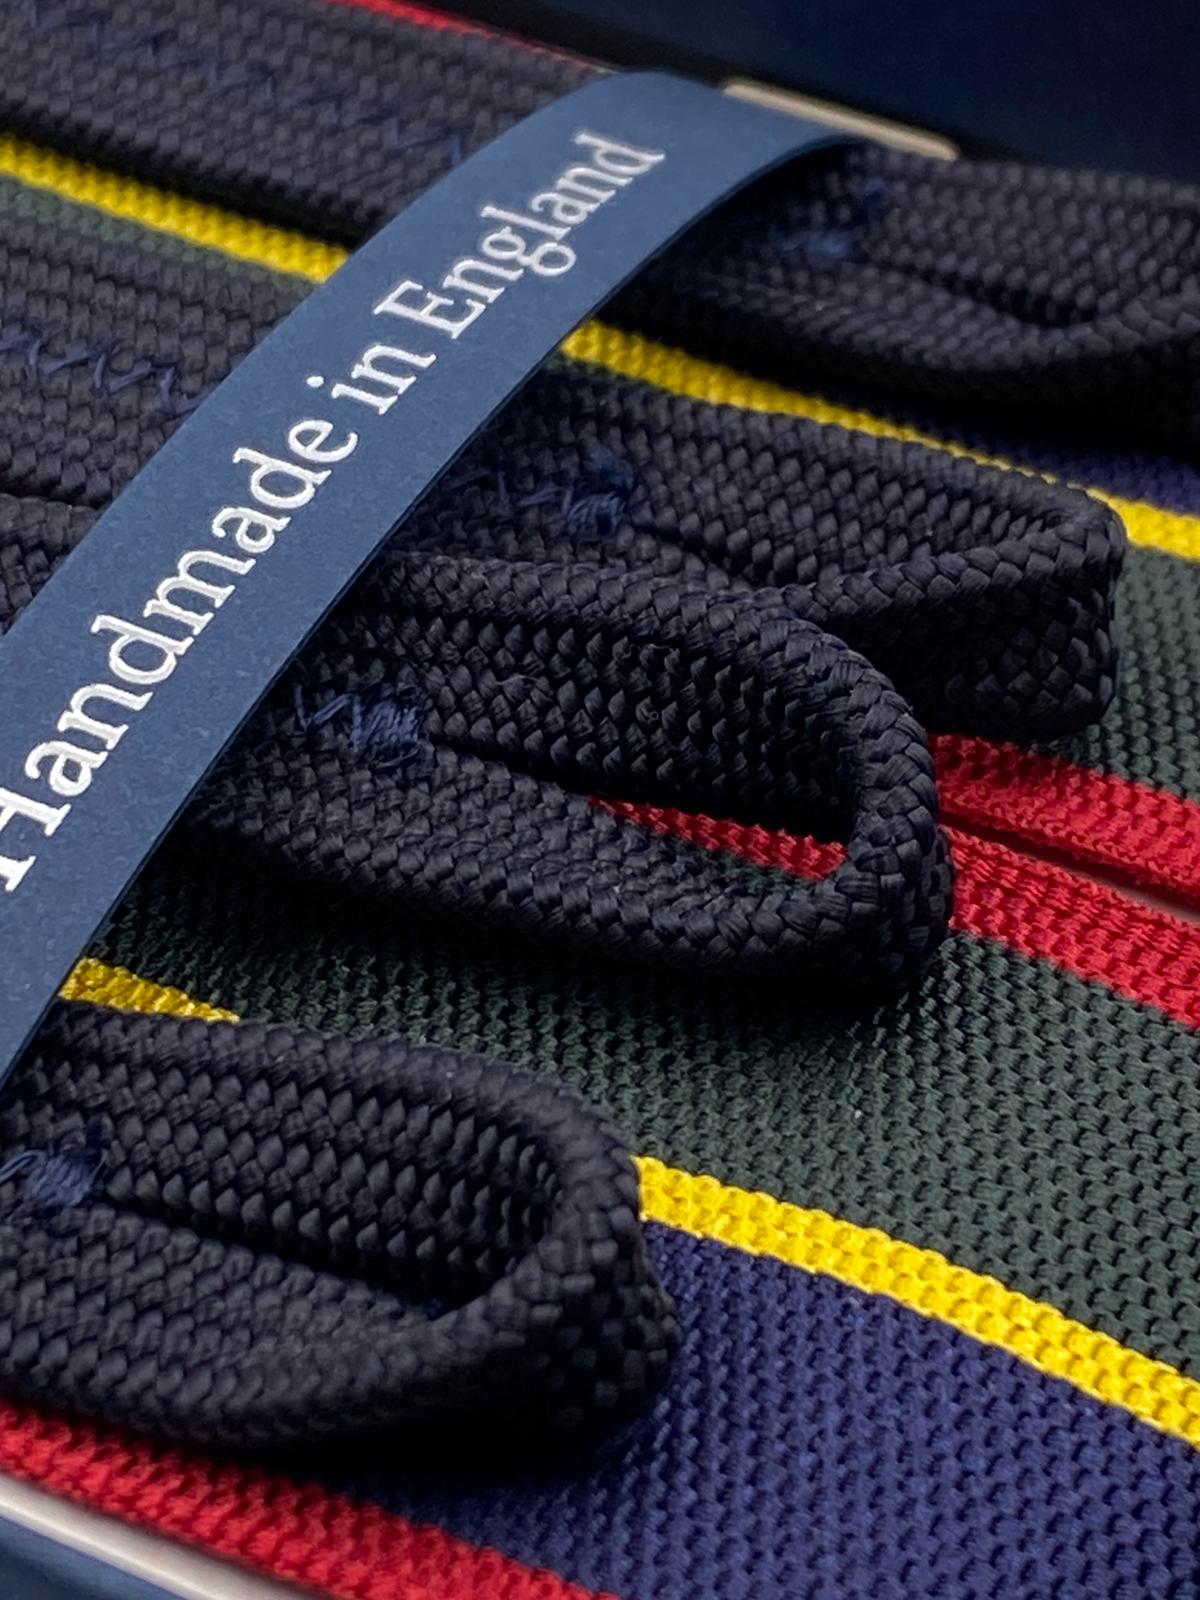 Albert Thurston for Cruciani & Bella Made in England Adjustable Sizing 40 mm Woven Barathea  Blue, Green, red and Yellow Stripes Braces Braid ends Y-Shaped Nickel Fittings Size: XL #4998